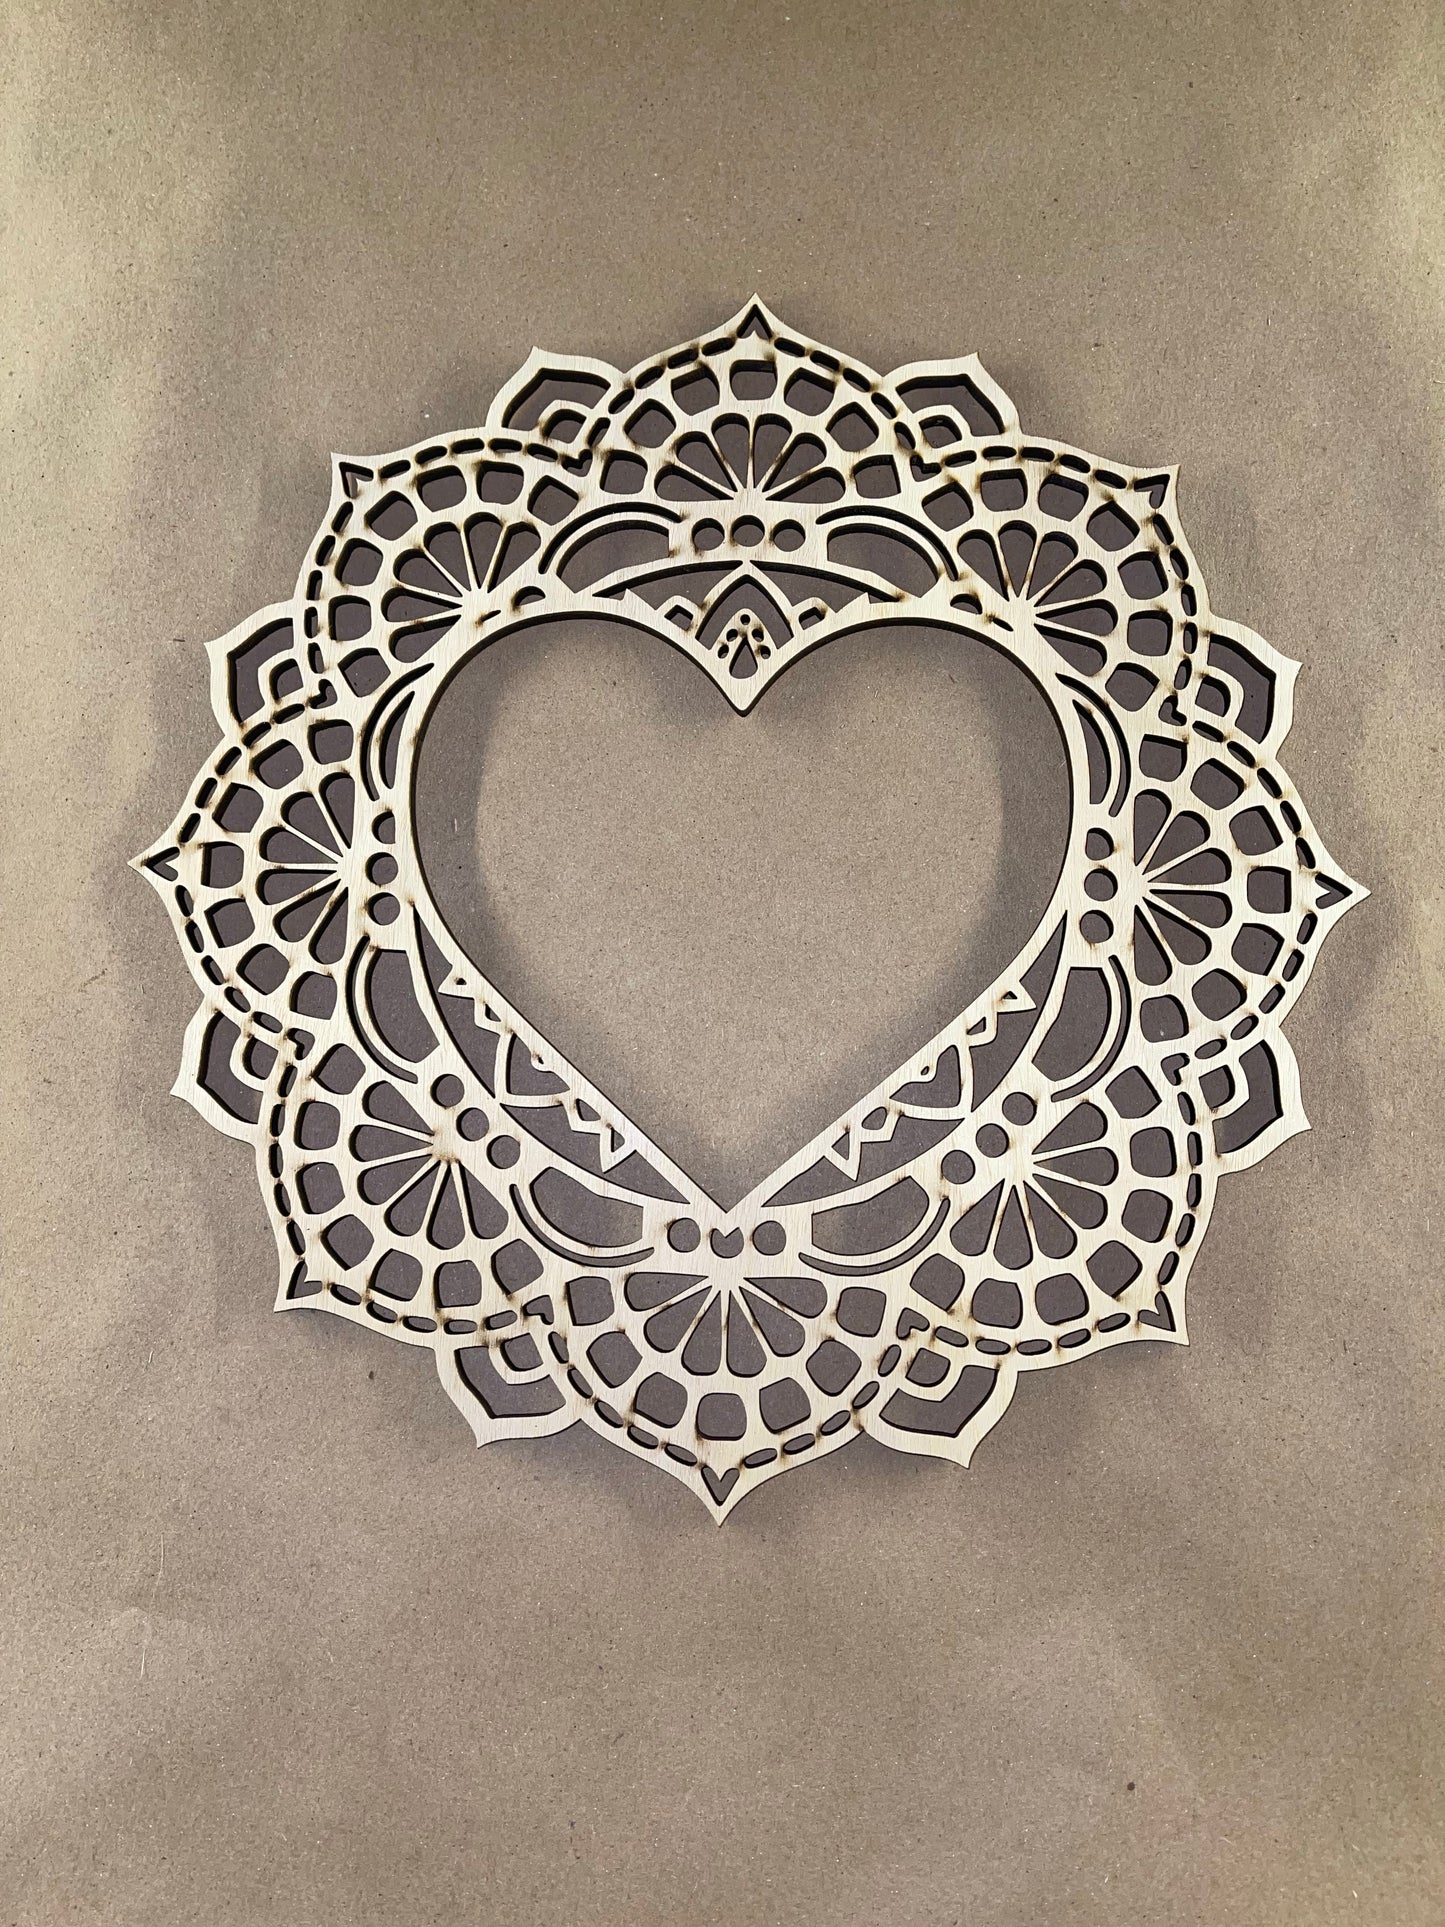 Heart and Lace Unfinished Wood frame. Resin art frame. DIY wood cutout. Unfinished laser cut wood resin frame.